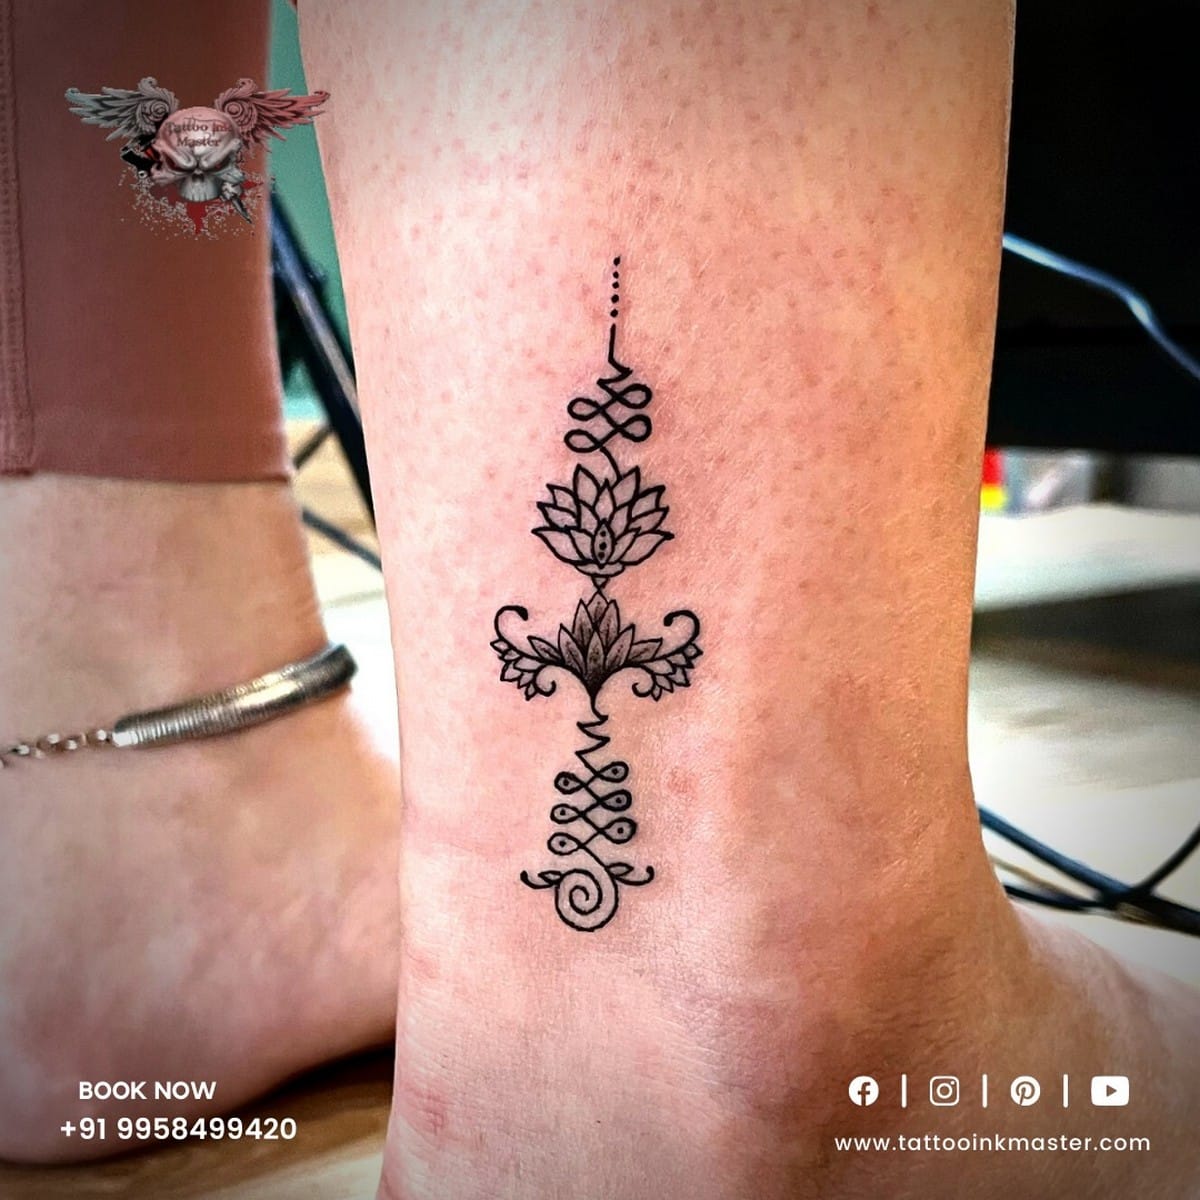 Fine line ornamental lotus flower tattoo on the ankle. | Foot tattoos for  women, Cute foot tattoos, Small foot tattoos